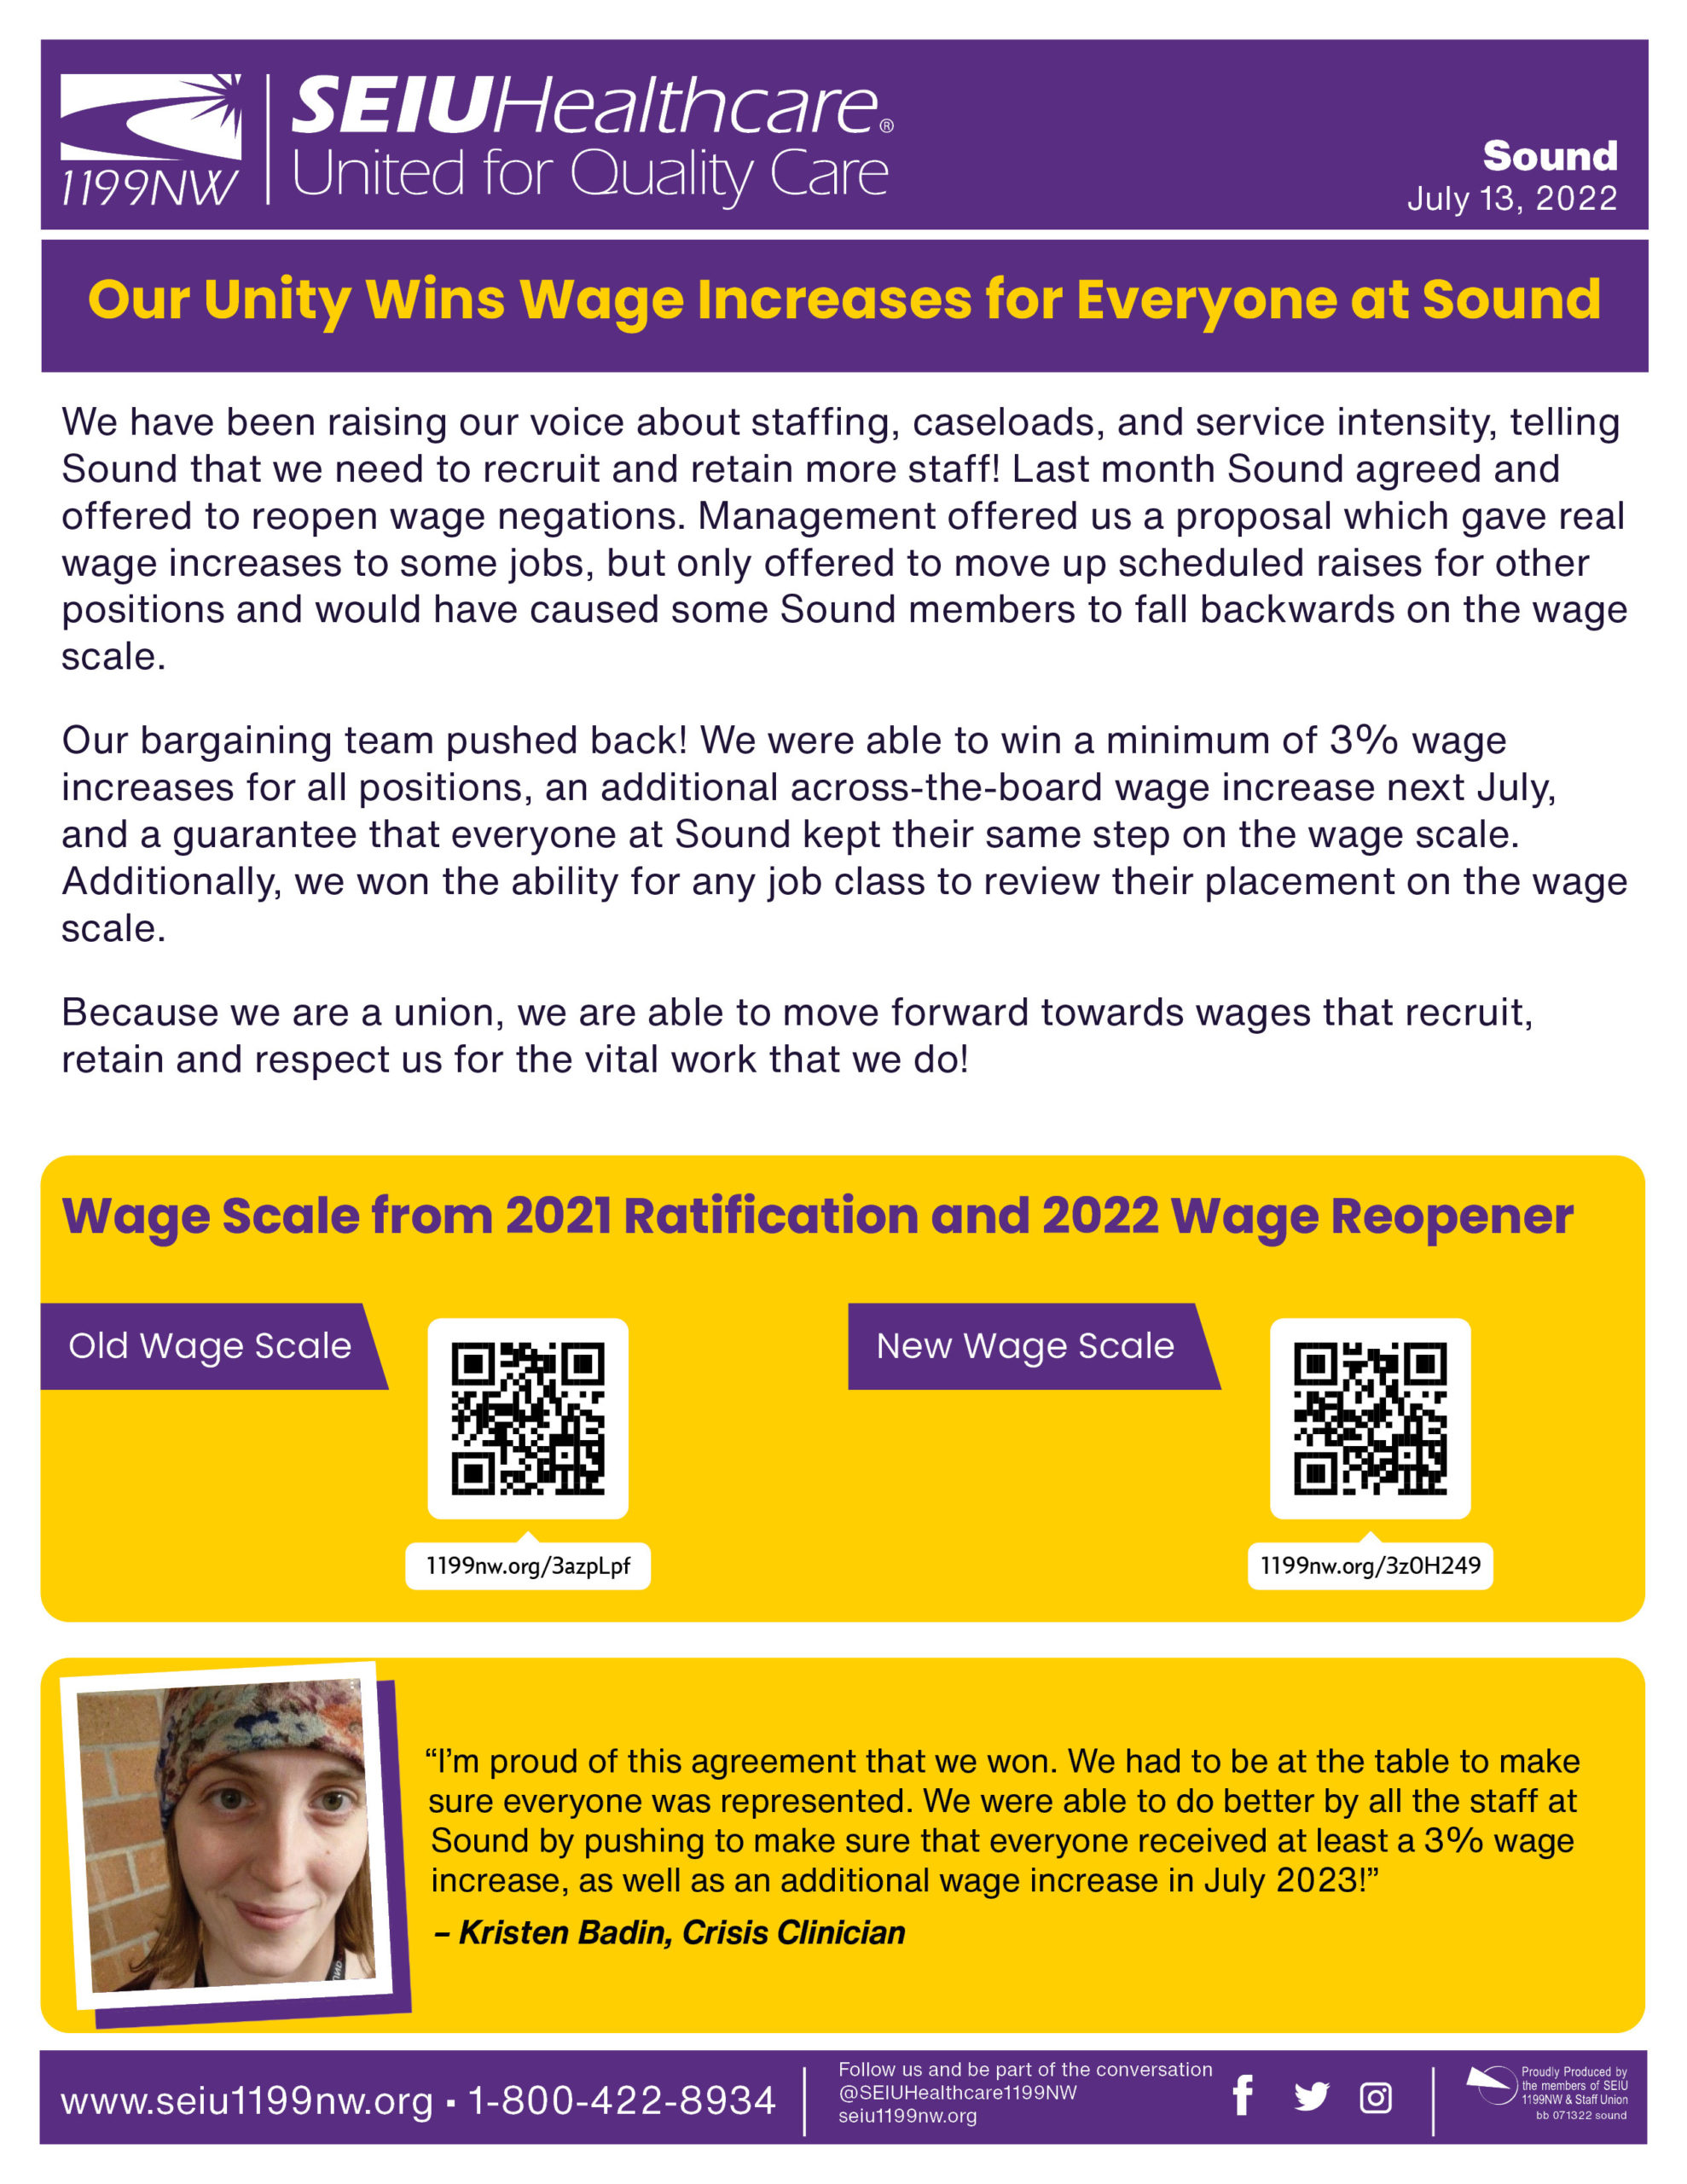 Our Unity Wins Wage Increases for Everyone at Sound